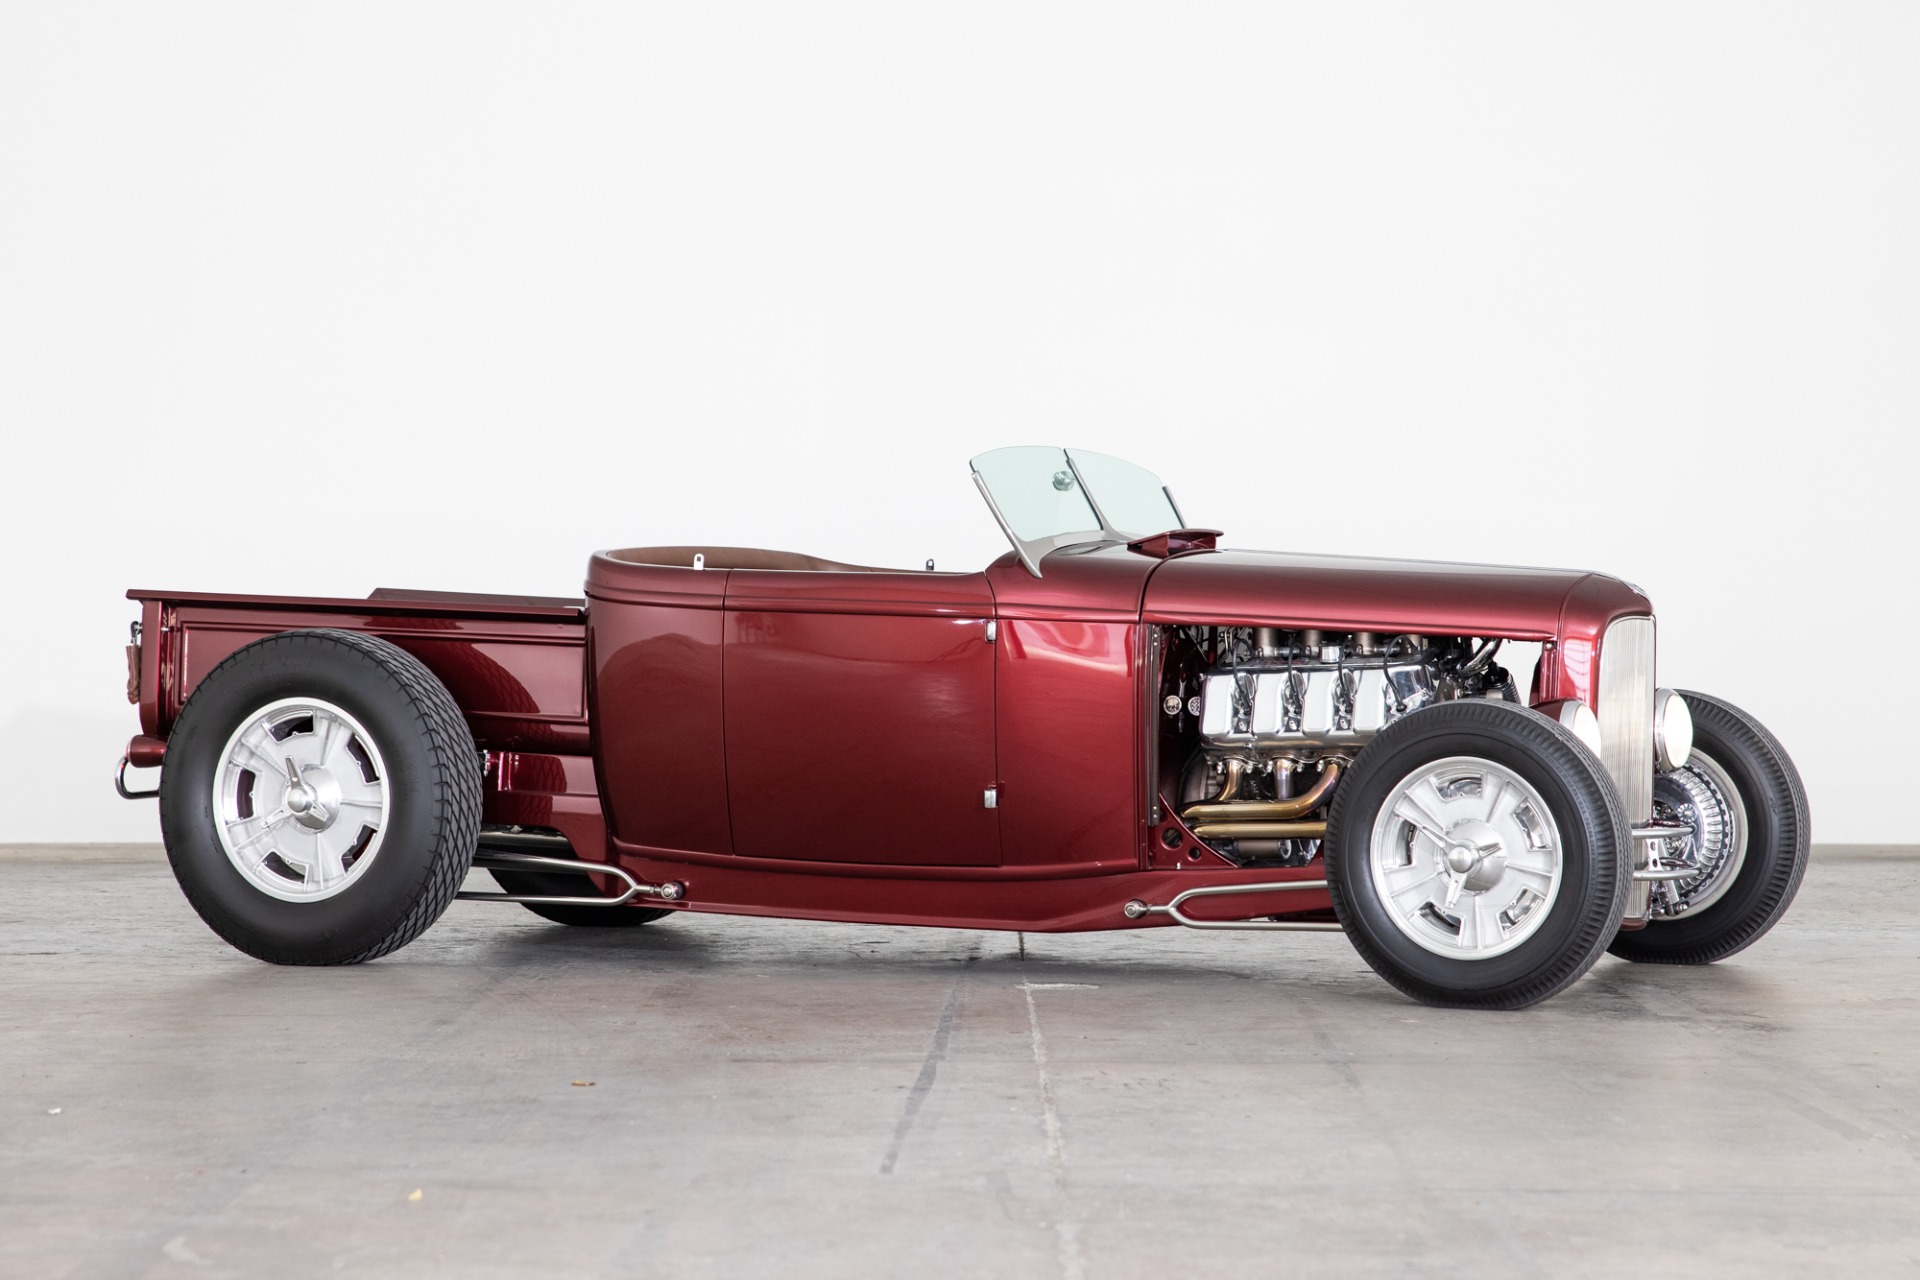 1932 Ford Pickup Hot Rod Gets Bluetooth Radio Upgrade for Great Sound